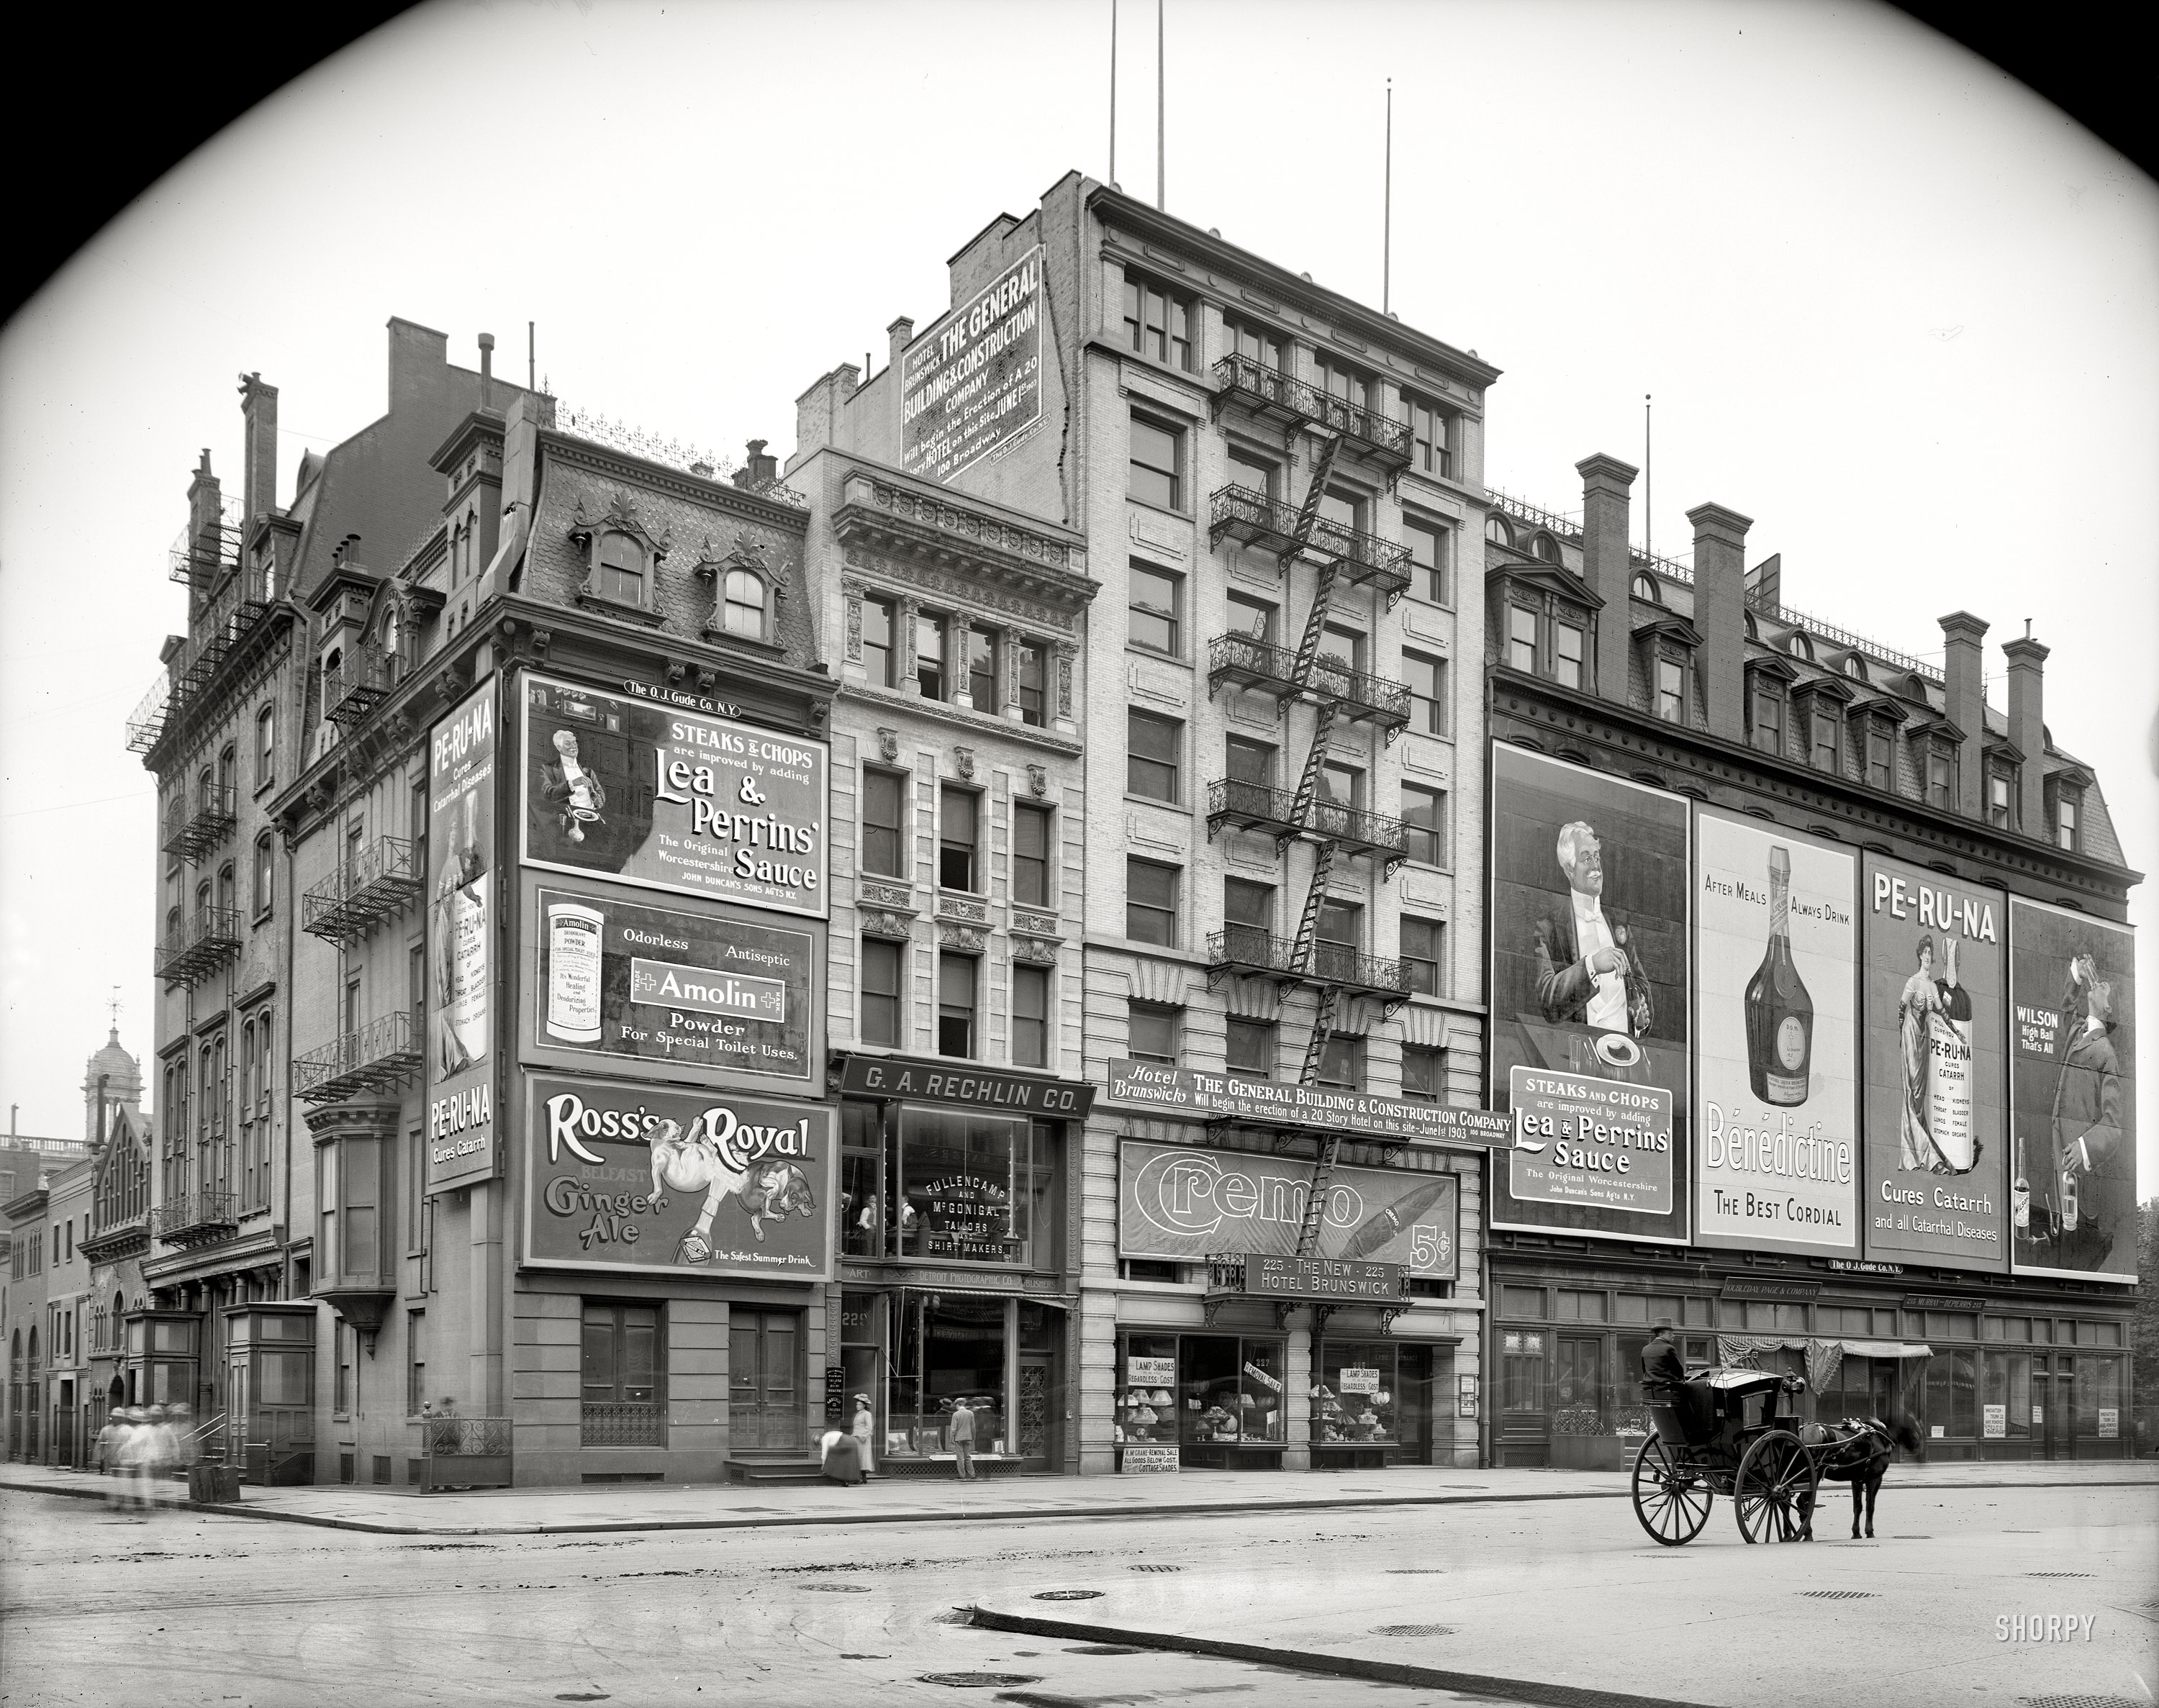 New York circa 1903. "Detroit Photographic Company, 229 Fifth Avenue." On this block destined for demolition, Everything Must Go. And Everywhere a Sign. And, for connoisseurs of ghost pedestrians, two sets of spectral footfalls. Plus a Dept. of Sanitation sweeper! Detroit Publishing glass negative. View full size.